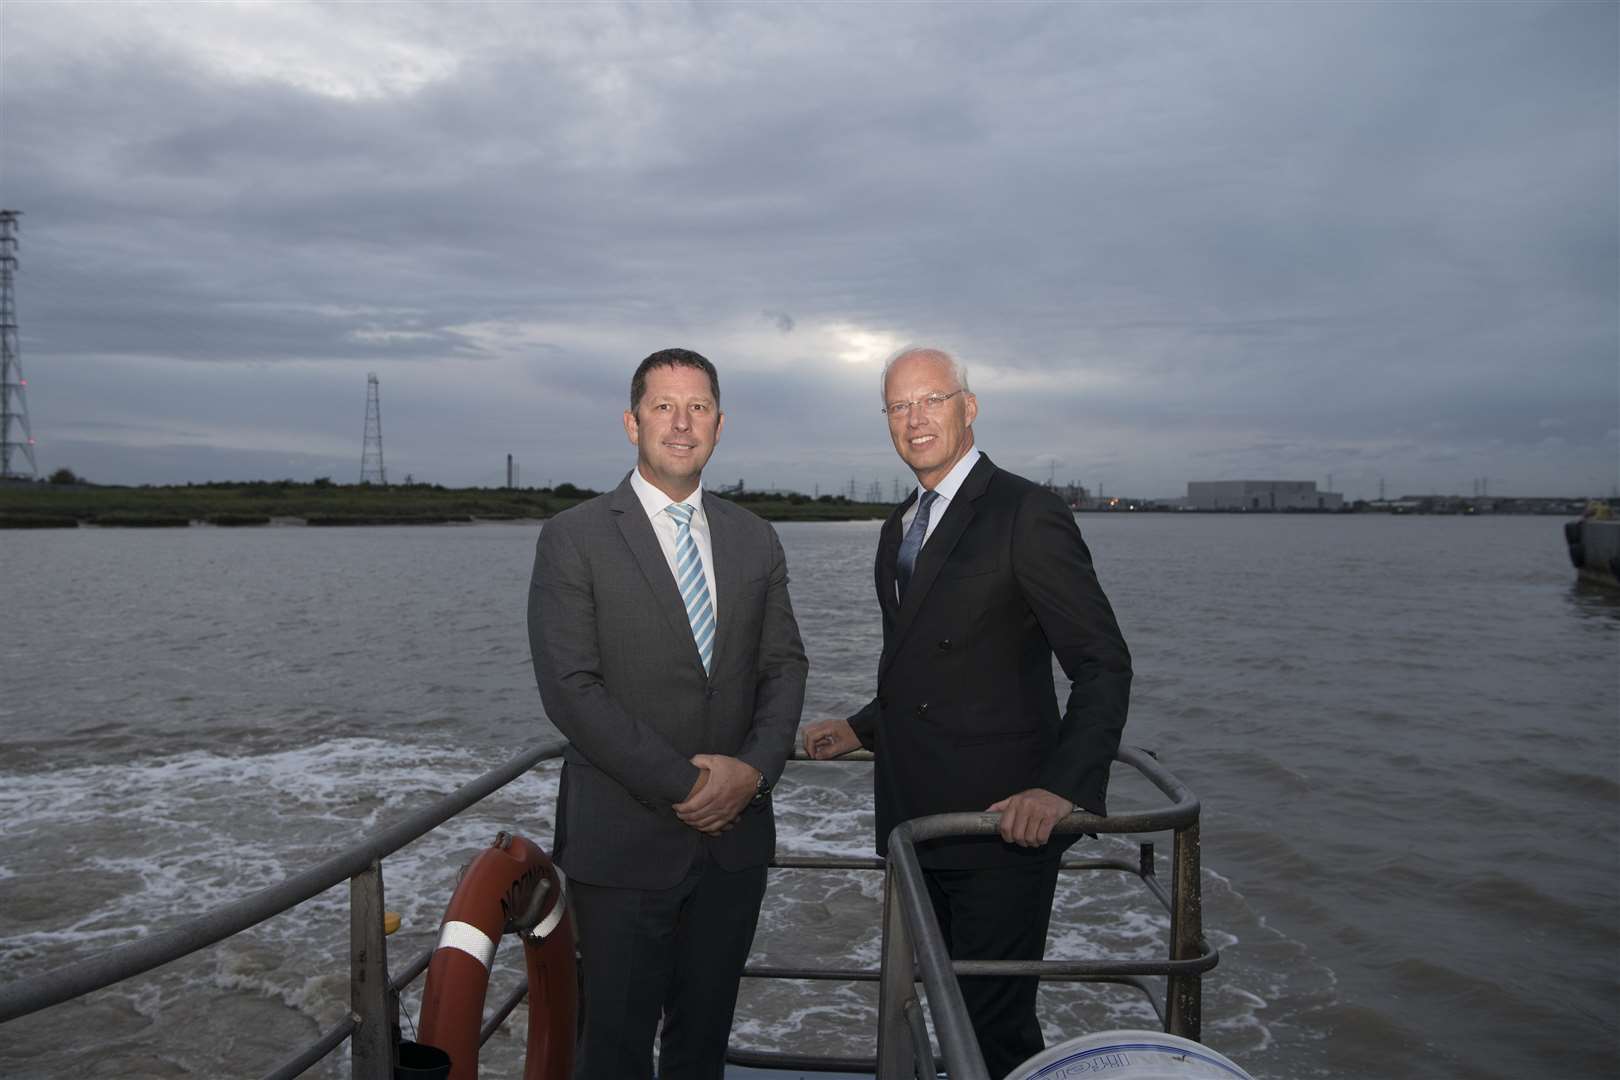 MBNA Thames Clippers chief executive Sean Collins, left, with London Resort Company Holdings boss Humphrey Percy